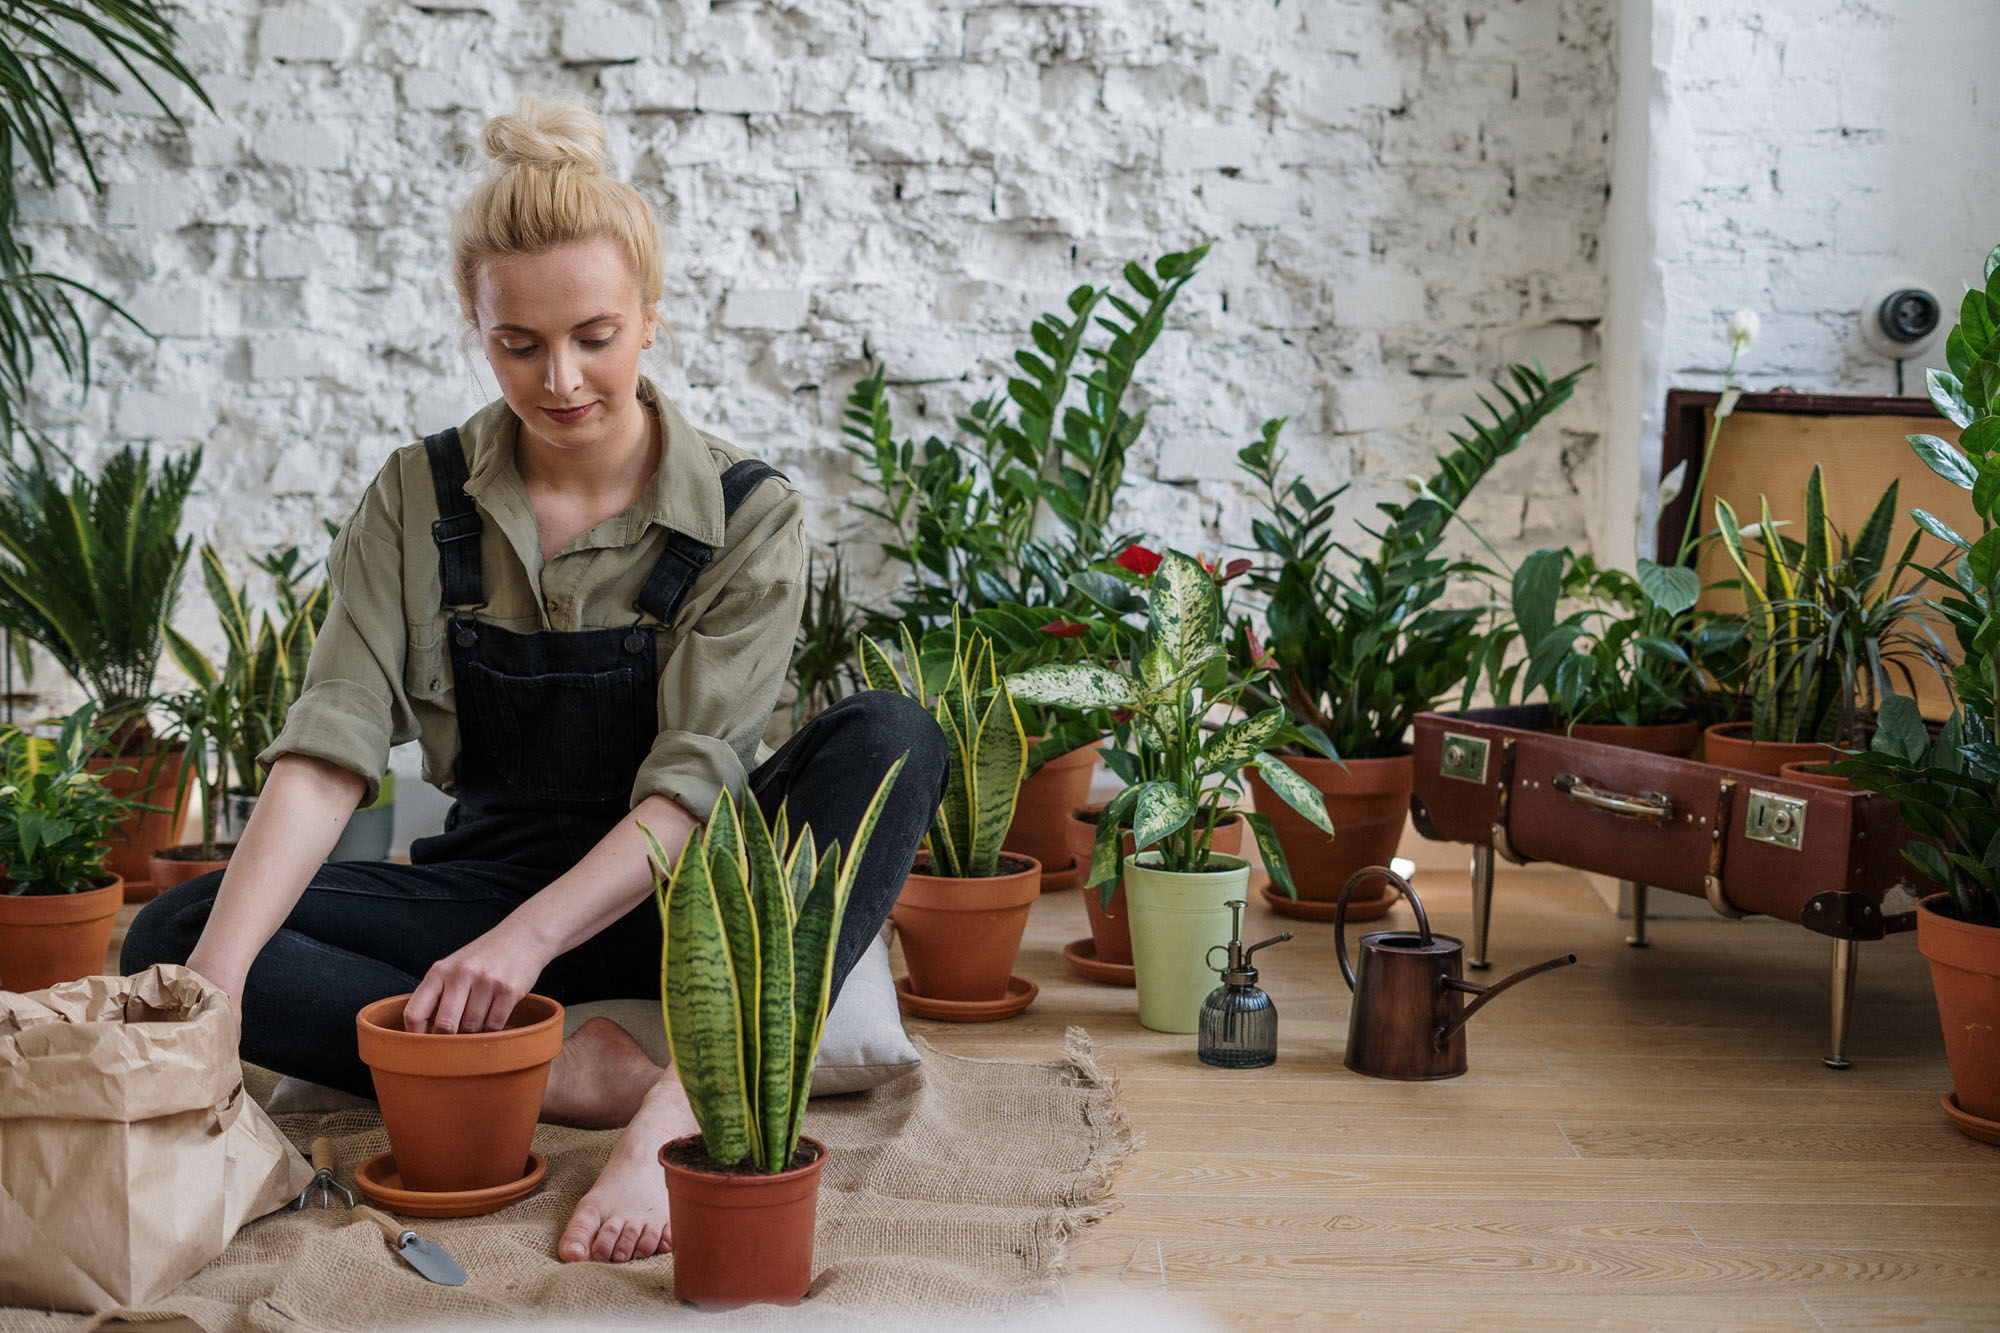 person on floor with plants and pots